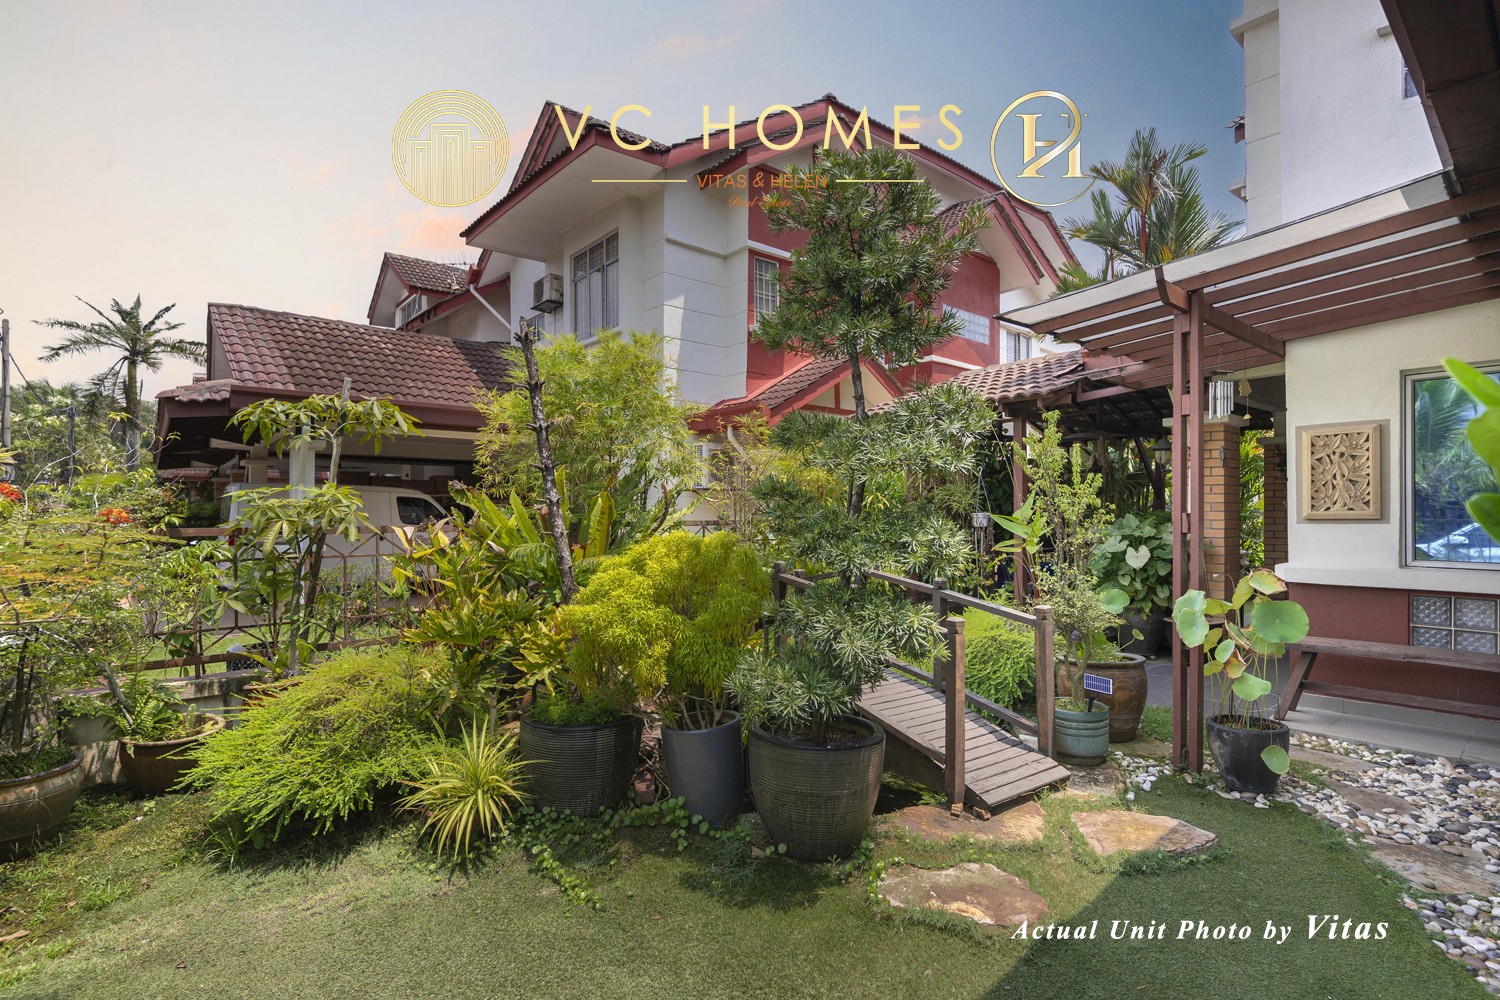 2 Sty Garden Home Semi-D at Bukit Puchong, Ready for Viewing